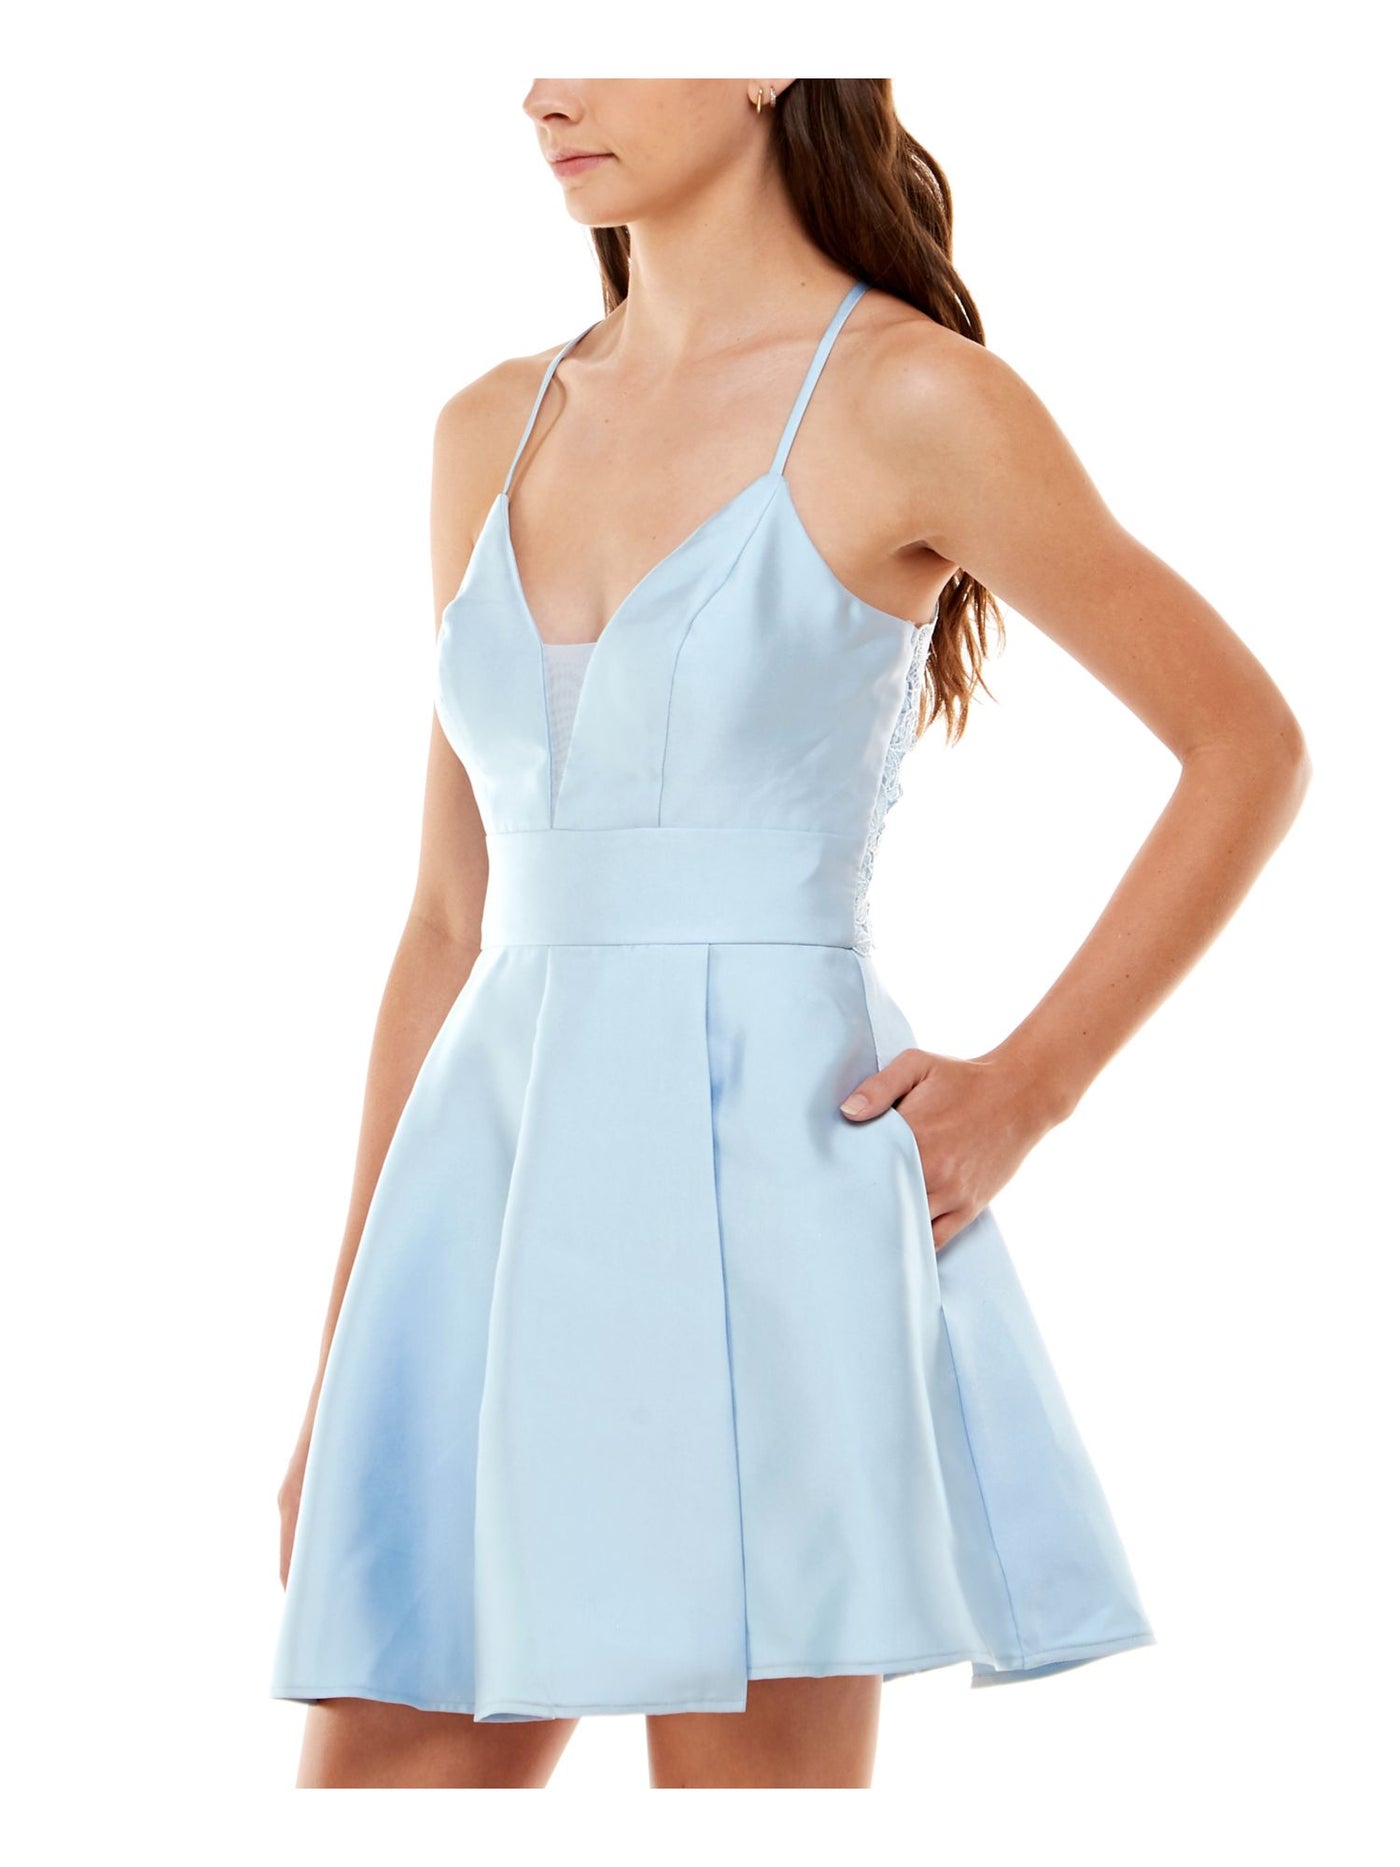 SPEECHLESS Womens Light Blue Pocketed Zippered Cut Out Lace Back Pleated Spaghetti Strap V Neck Short Party Fit + Flare Dress Juniors 15